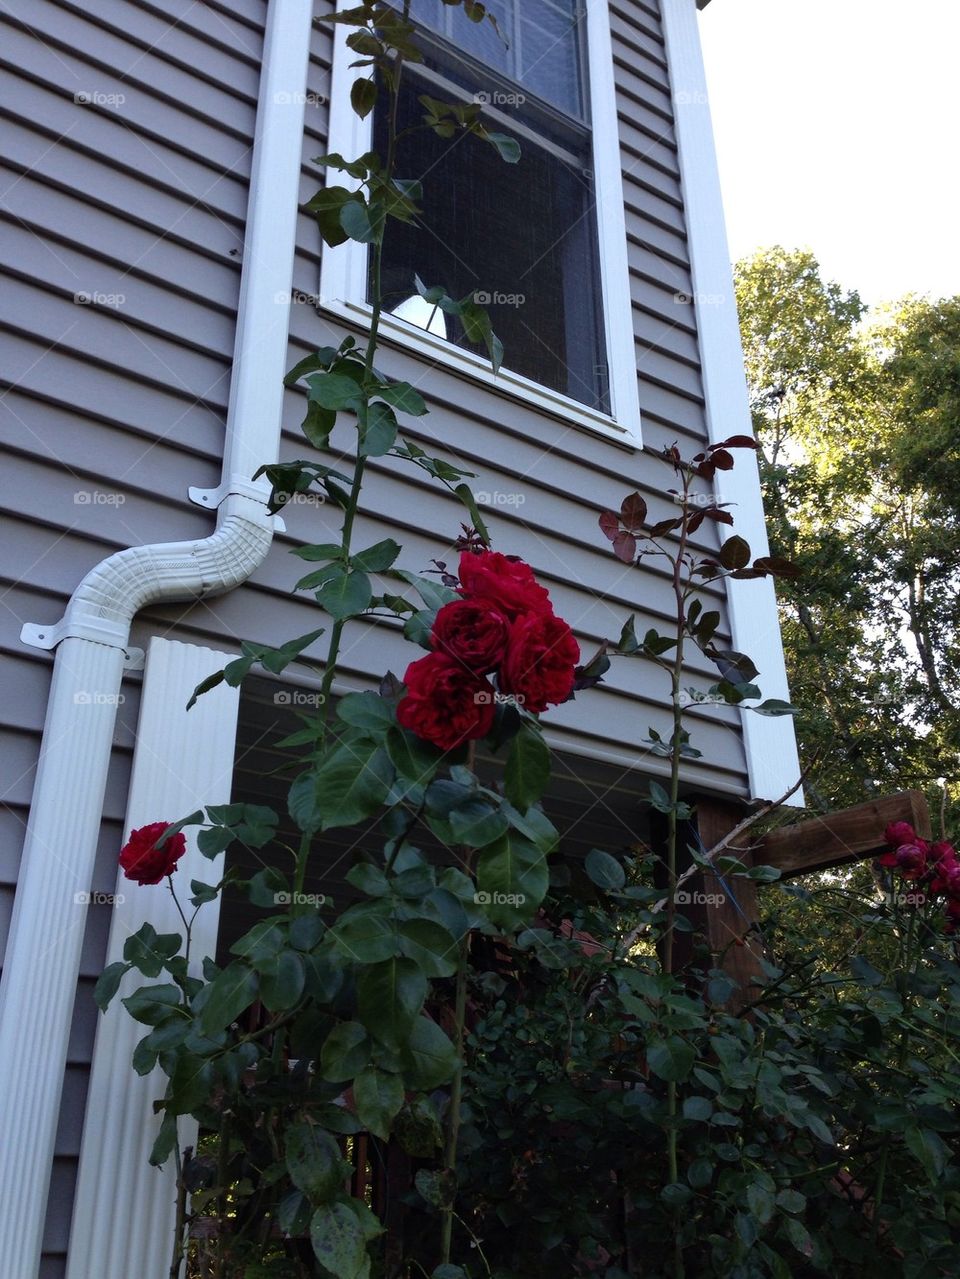 Climbing Roses so high up to my second floor